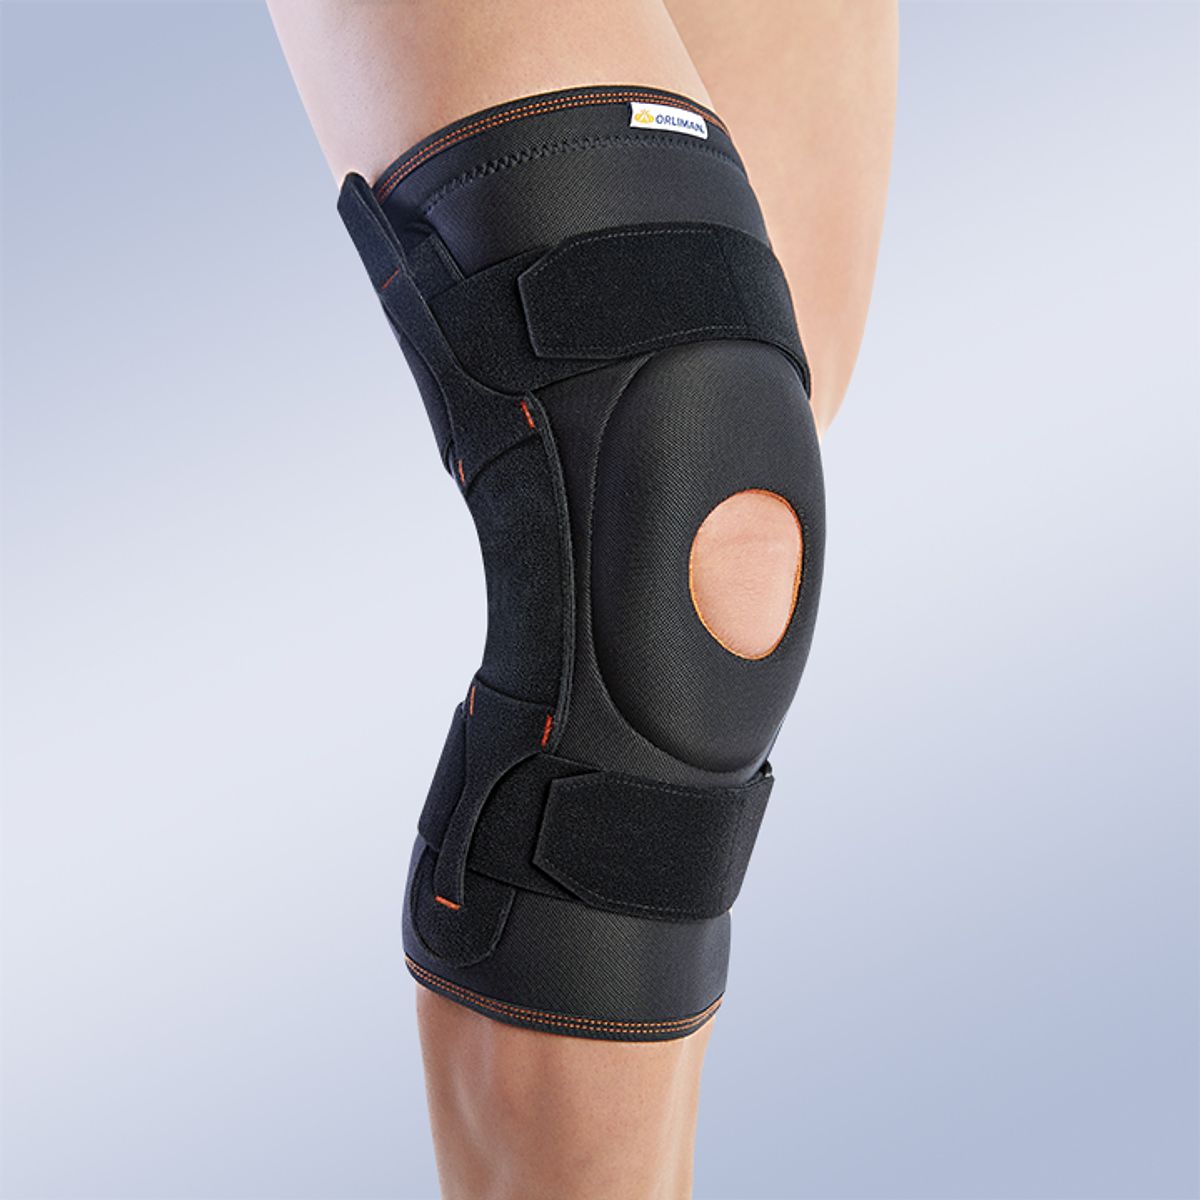 Open kneecap knee joint with polycystic joints